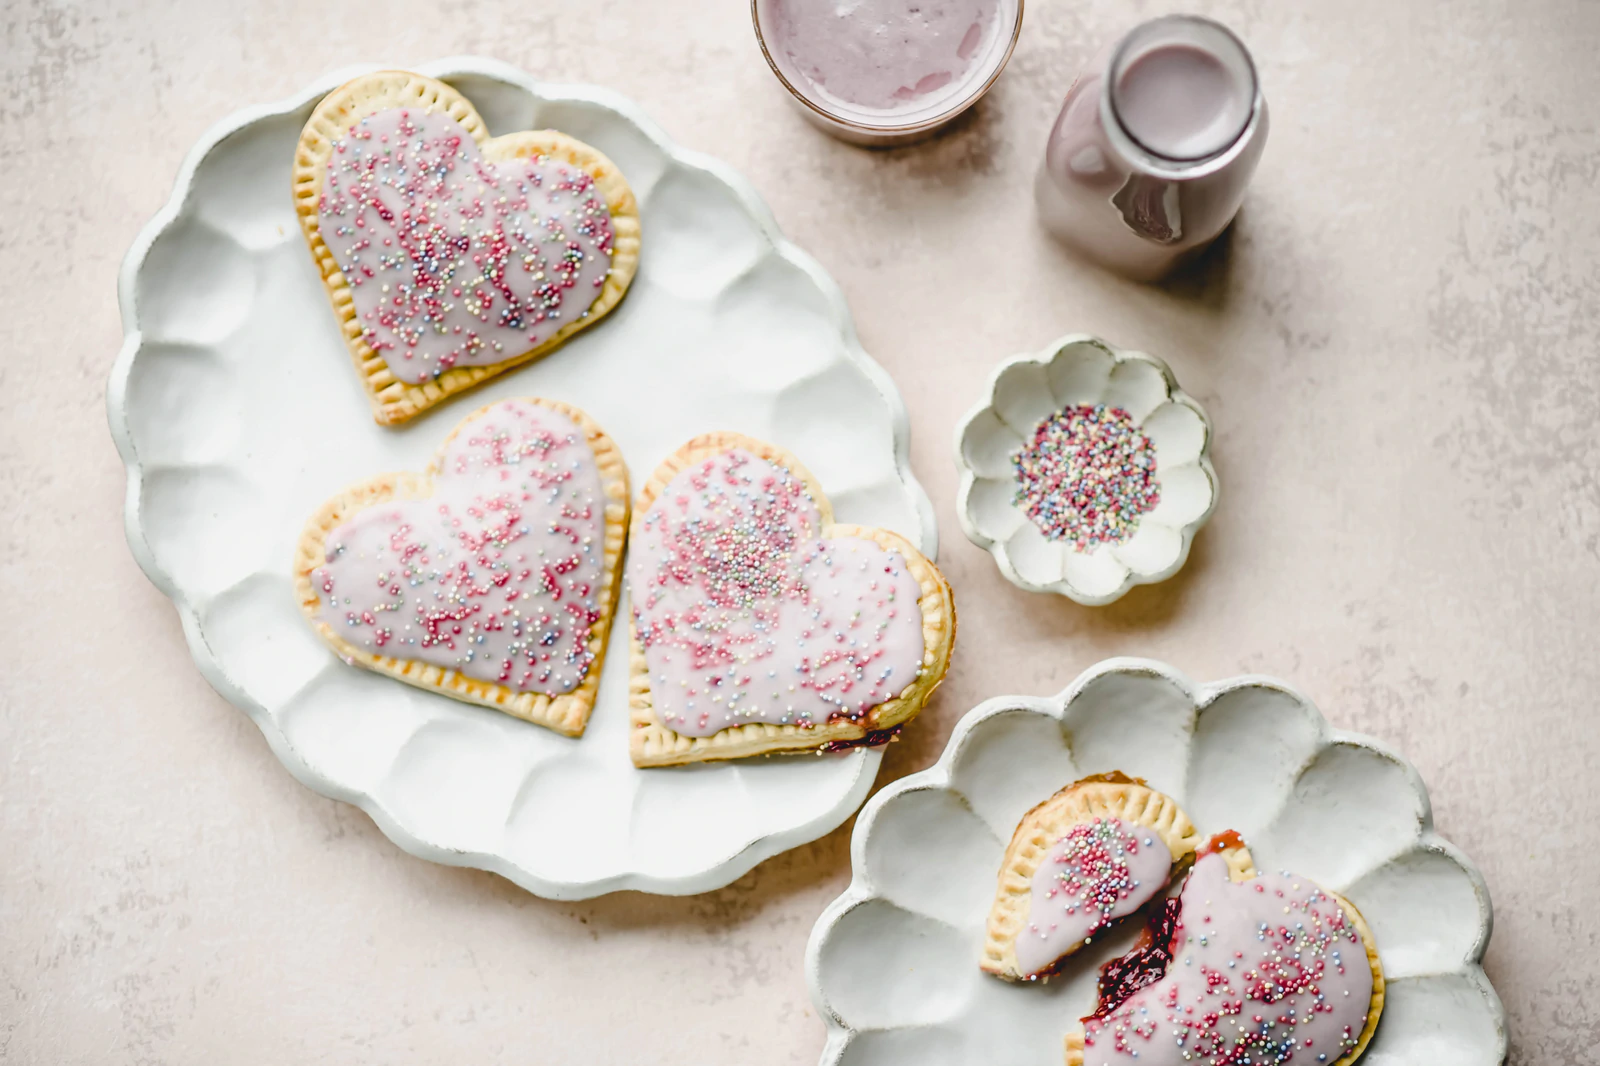 Valentine's Day dessert ideas made easy with Almond Cow